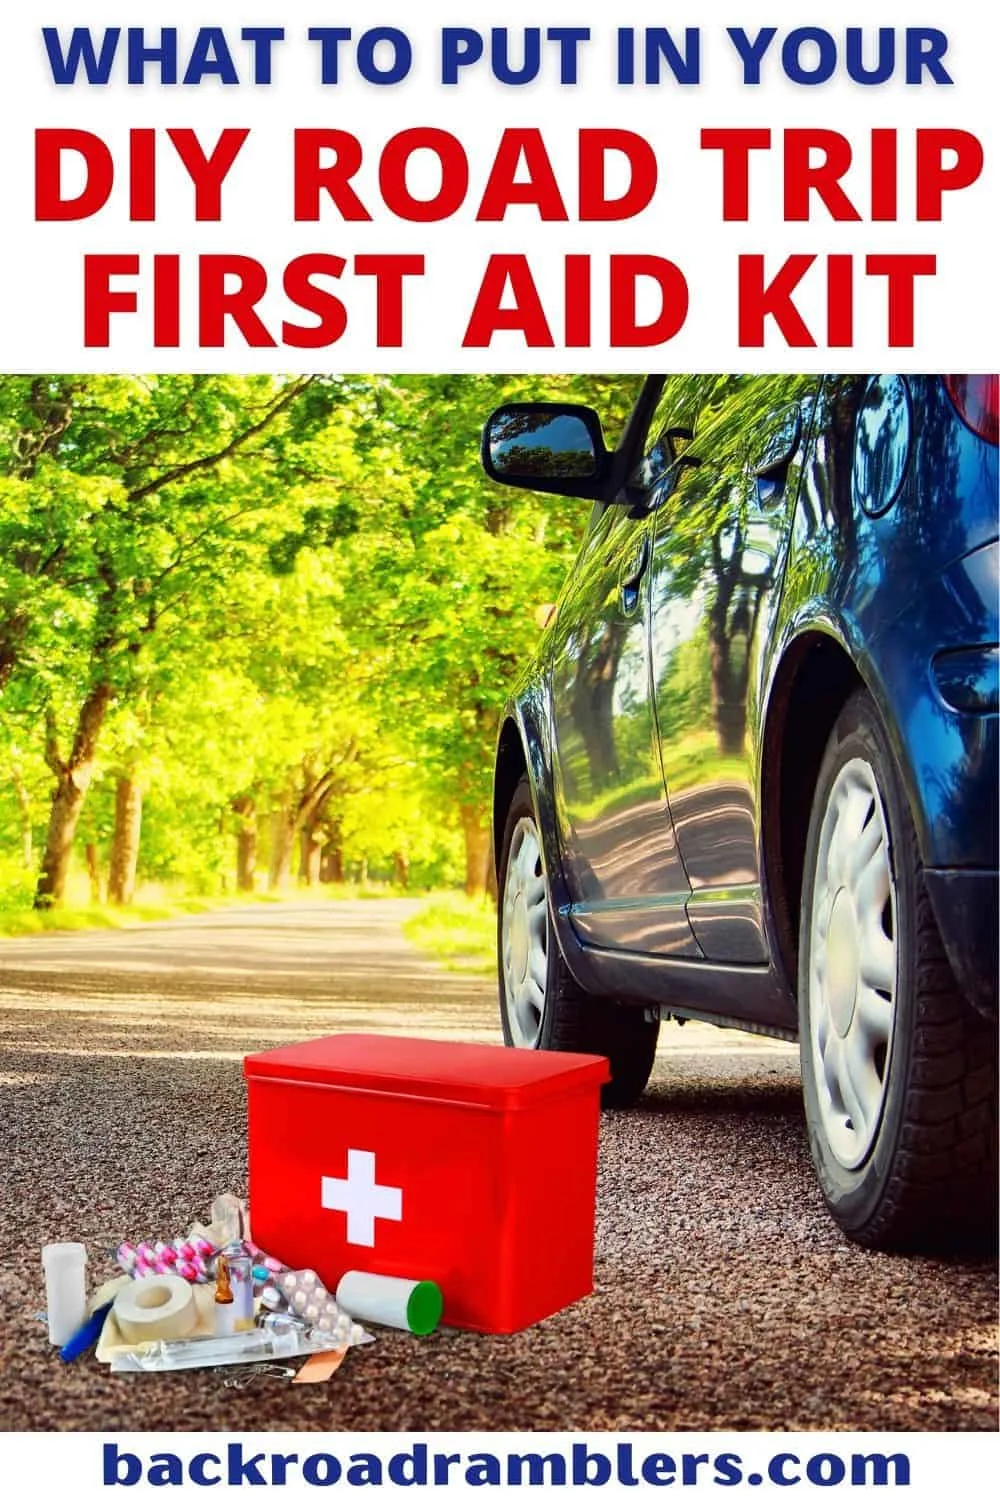 A small first aid kit next to a car. Text overlay: What you need to put into your DIY Road Trip First Aid Kit.